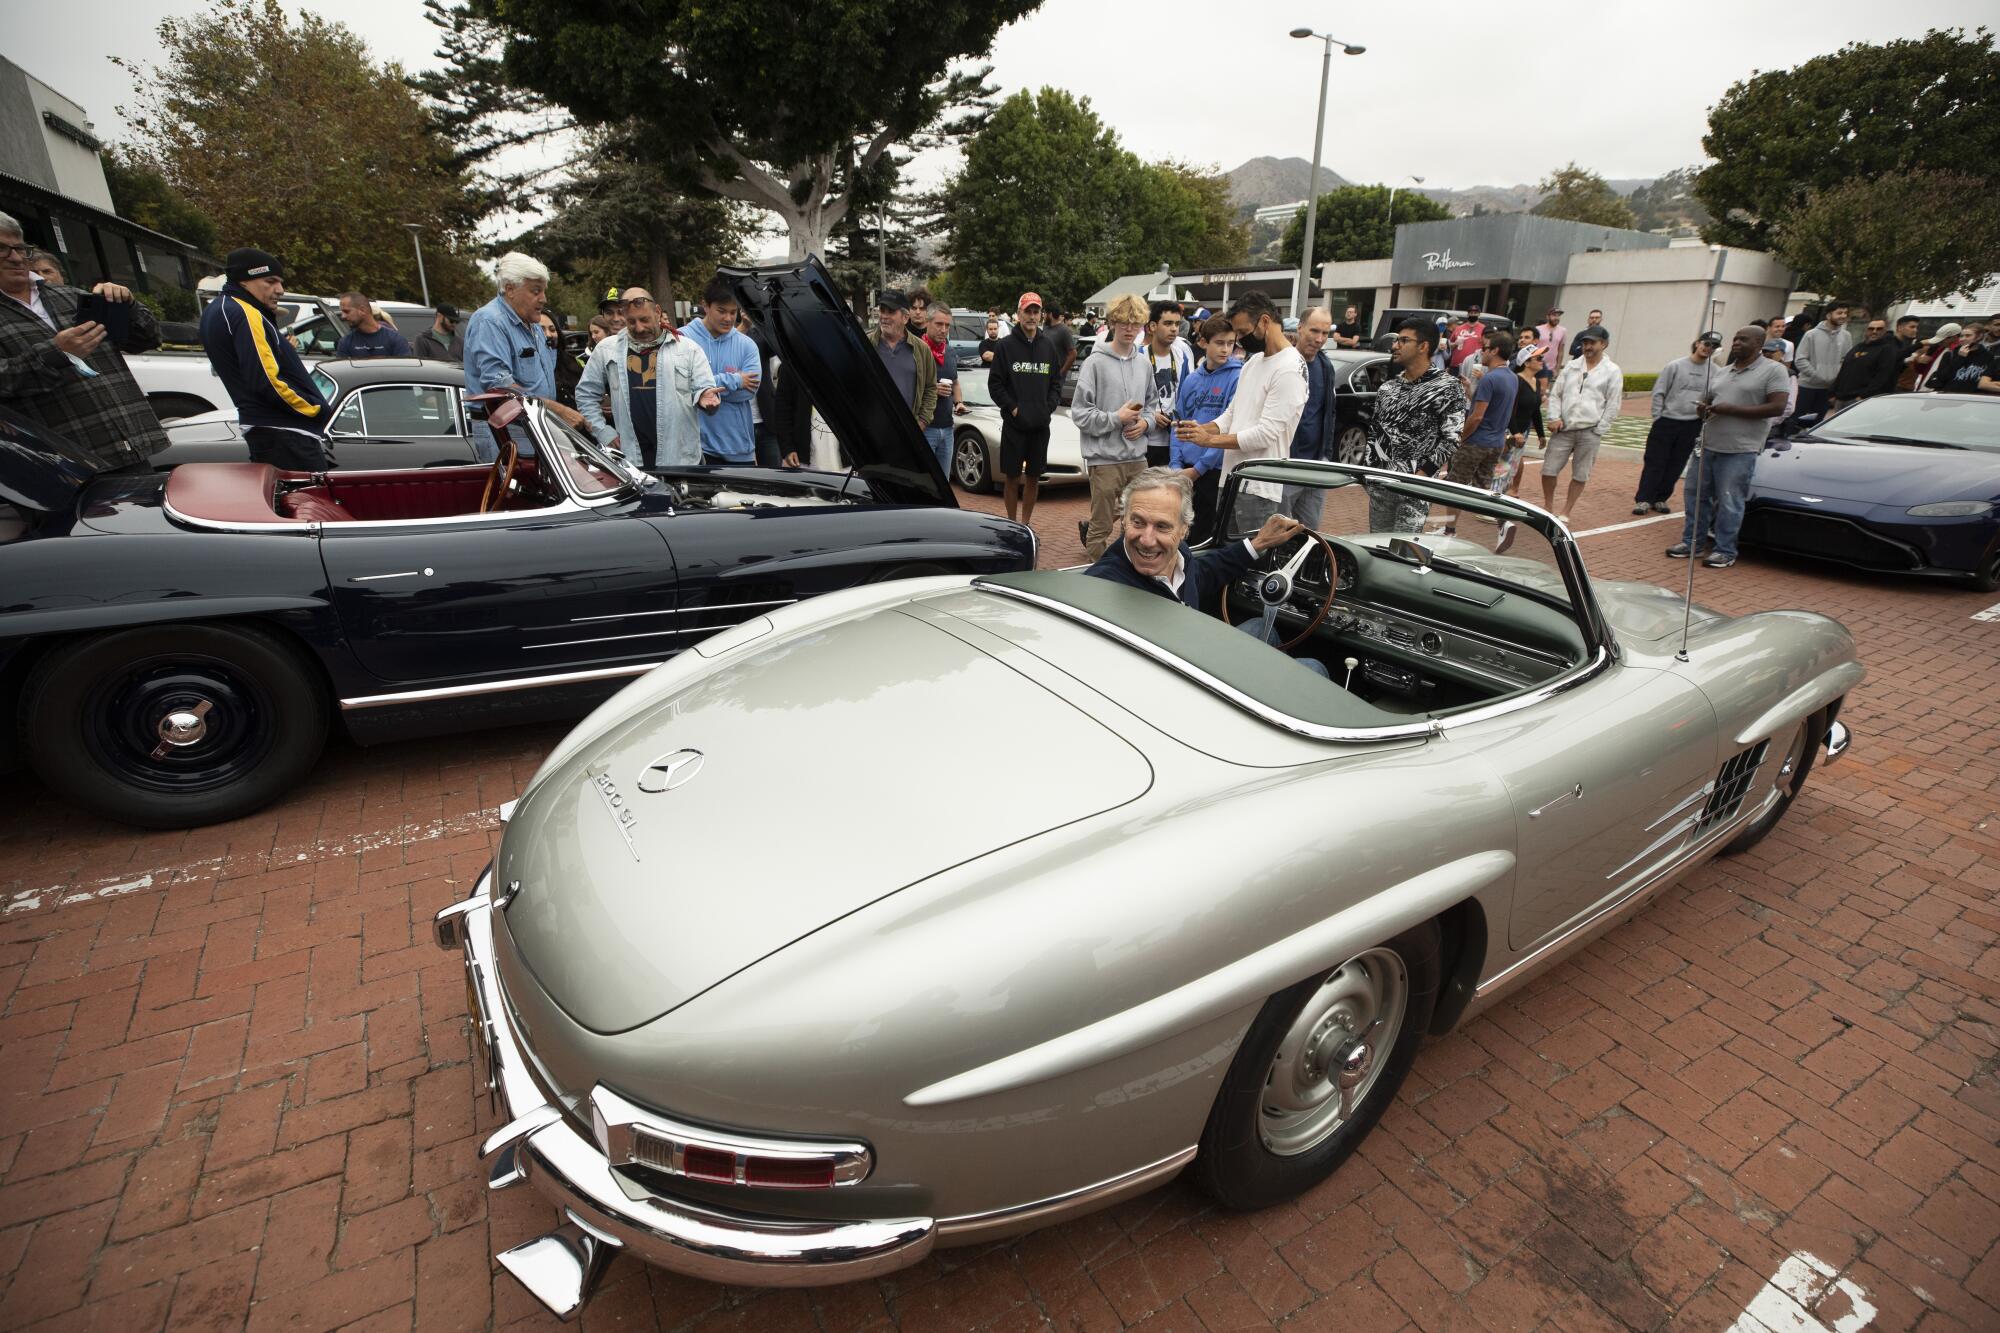 Bruce Meyer, a Beverly Hills retail and real estate magnate, parks his 1957 Mercedes-Benz 300 SL Roadster in Malibu.